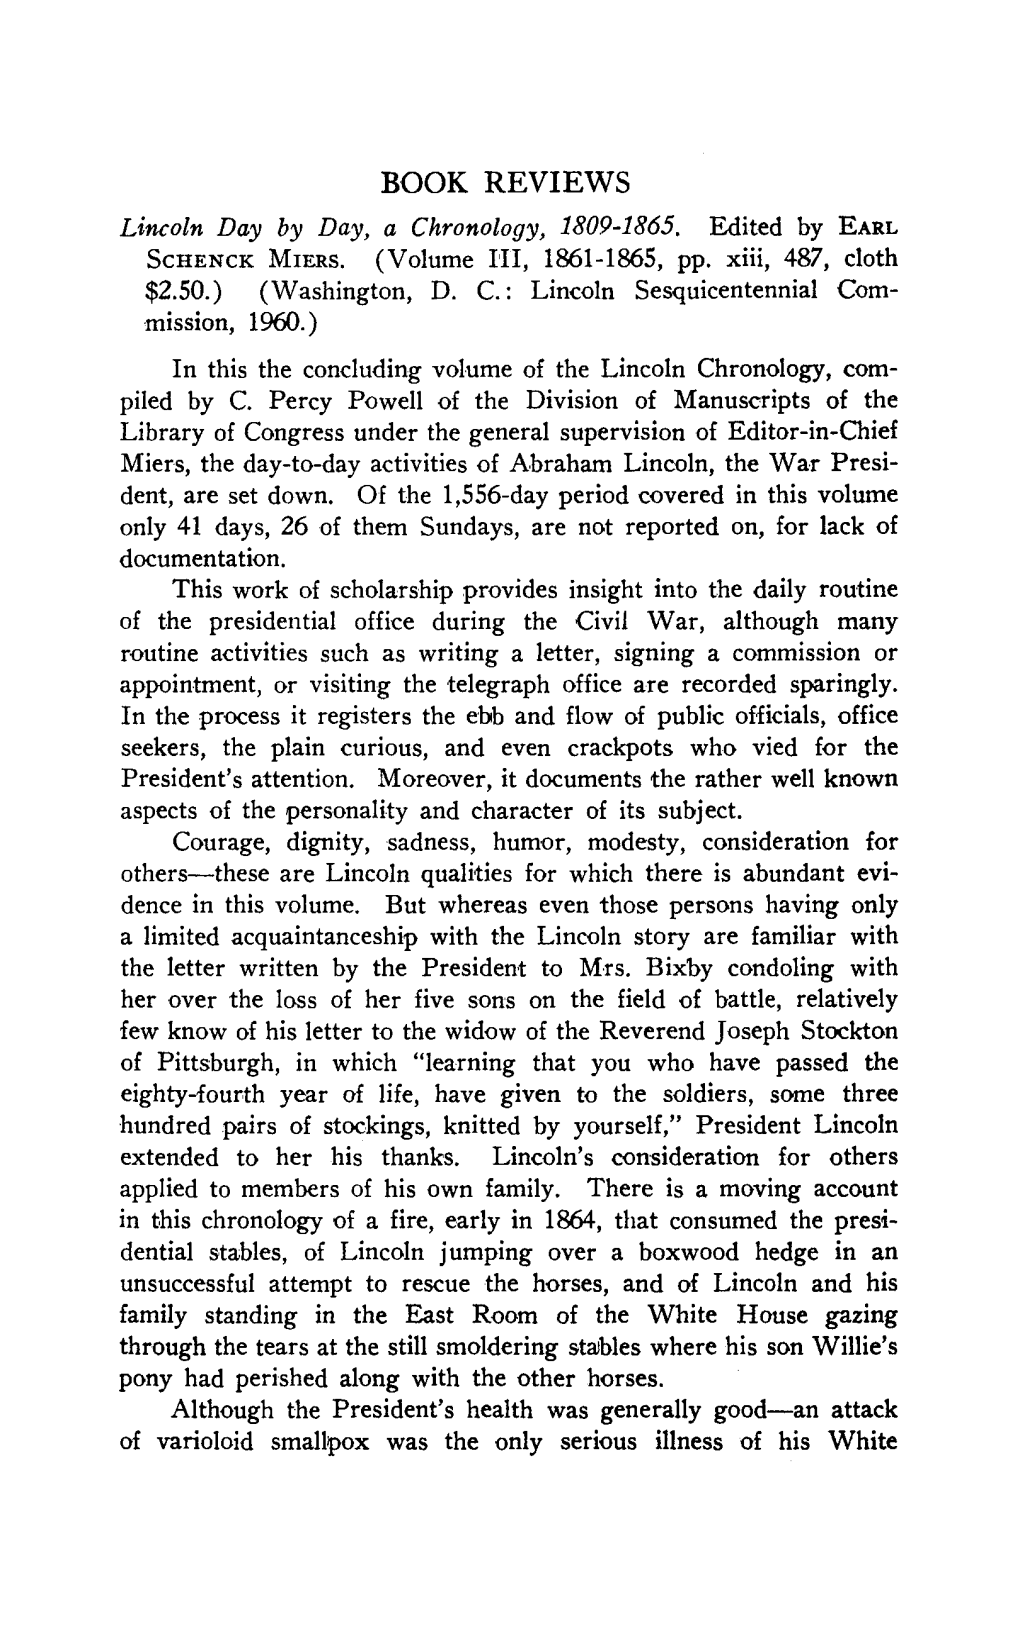 BOOK REVIEWS Lincoln Day by Day, a Chronology, 1809-1865, Edited by Earl Schenck Miers